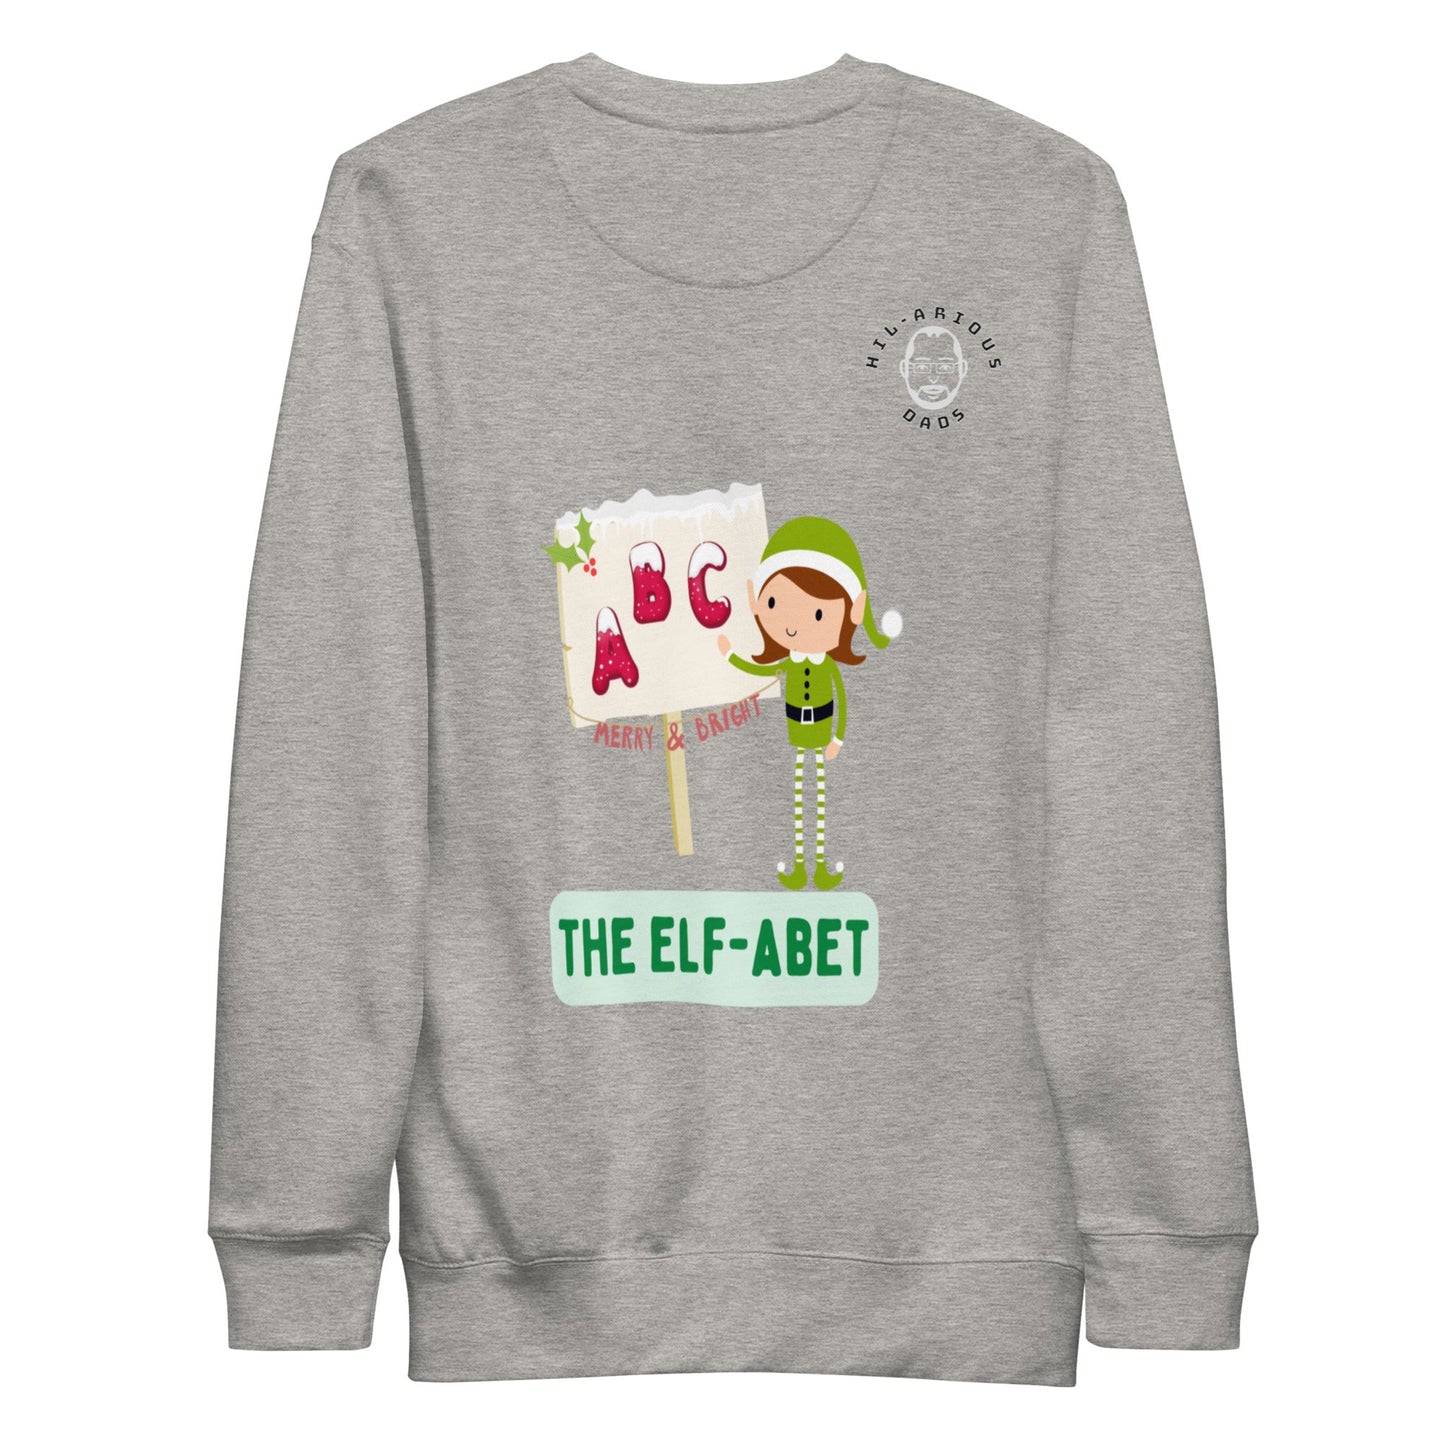 What do Santa’s little helpers learn at school?-Sweatshirt - Hil-arious Dads